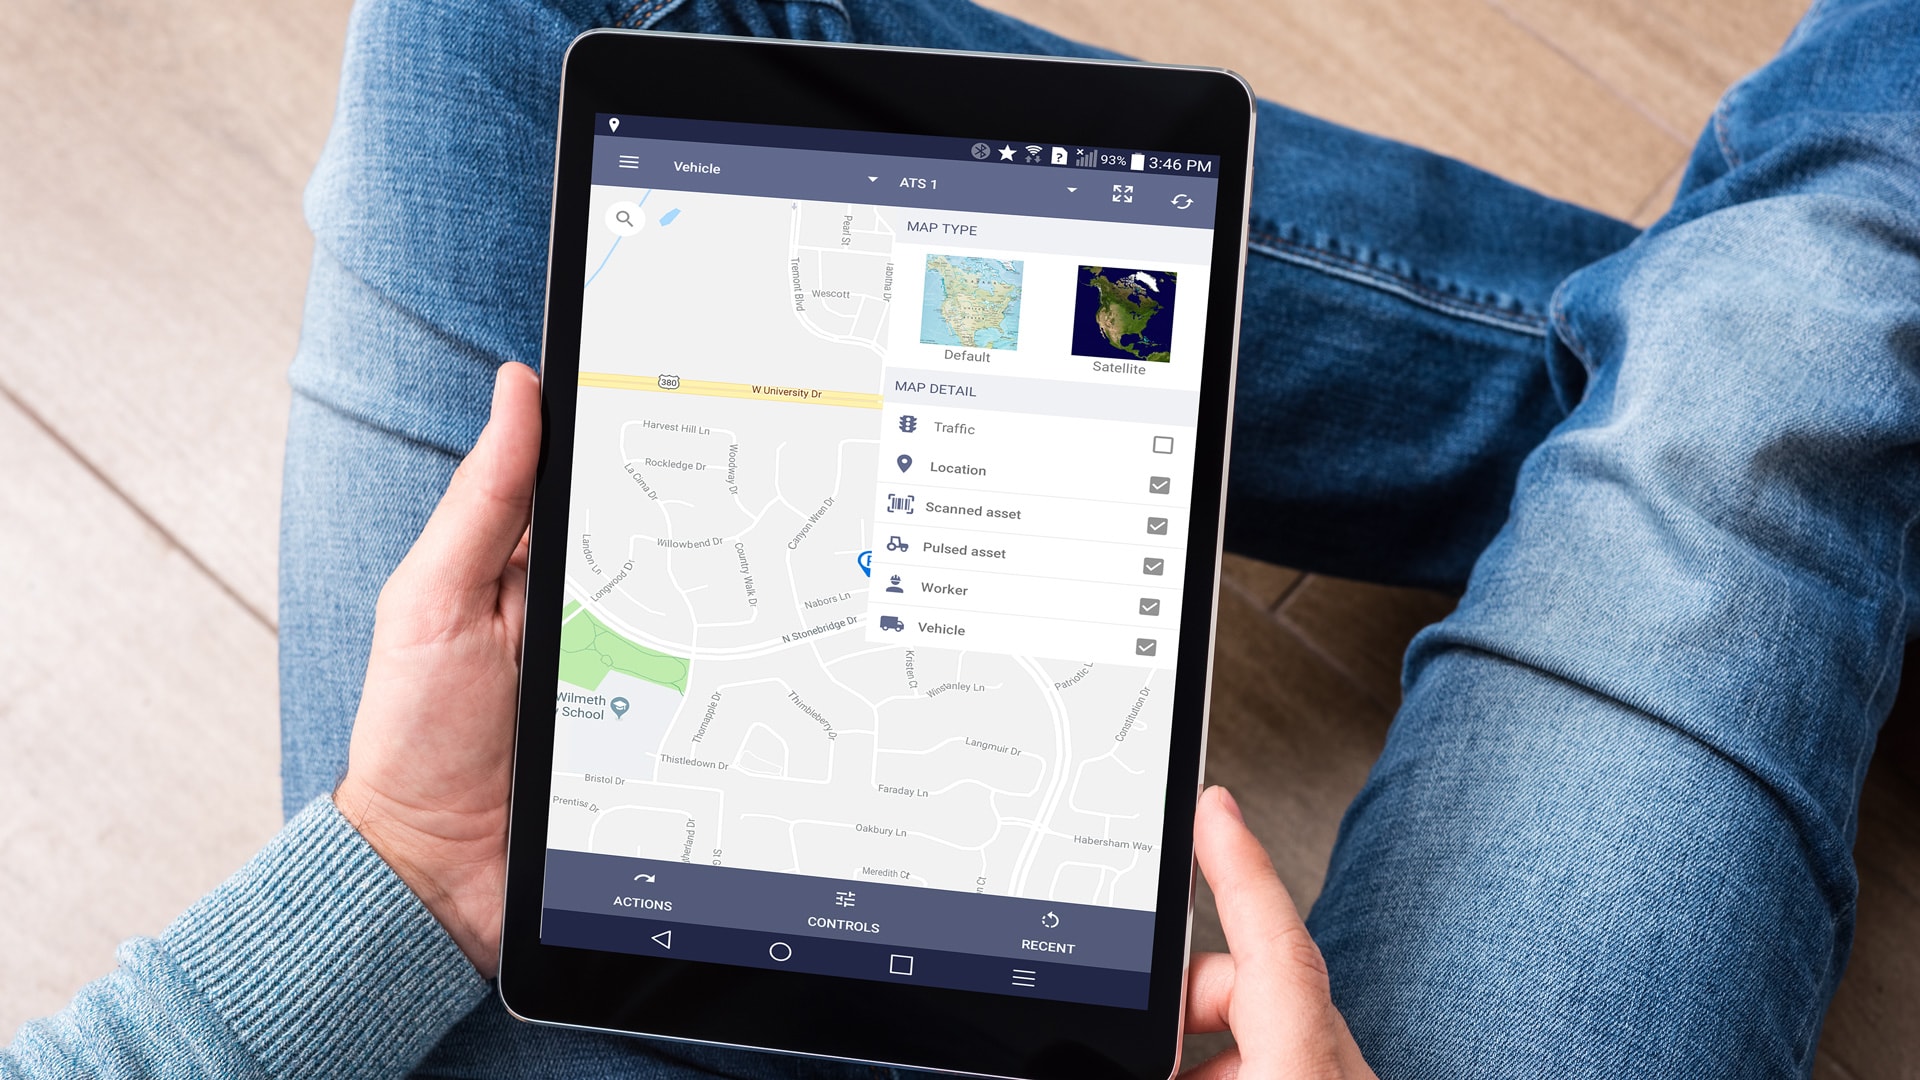 StreetEagle fleet management software available from smartphone or tablet